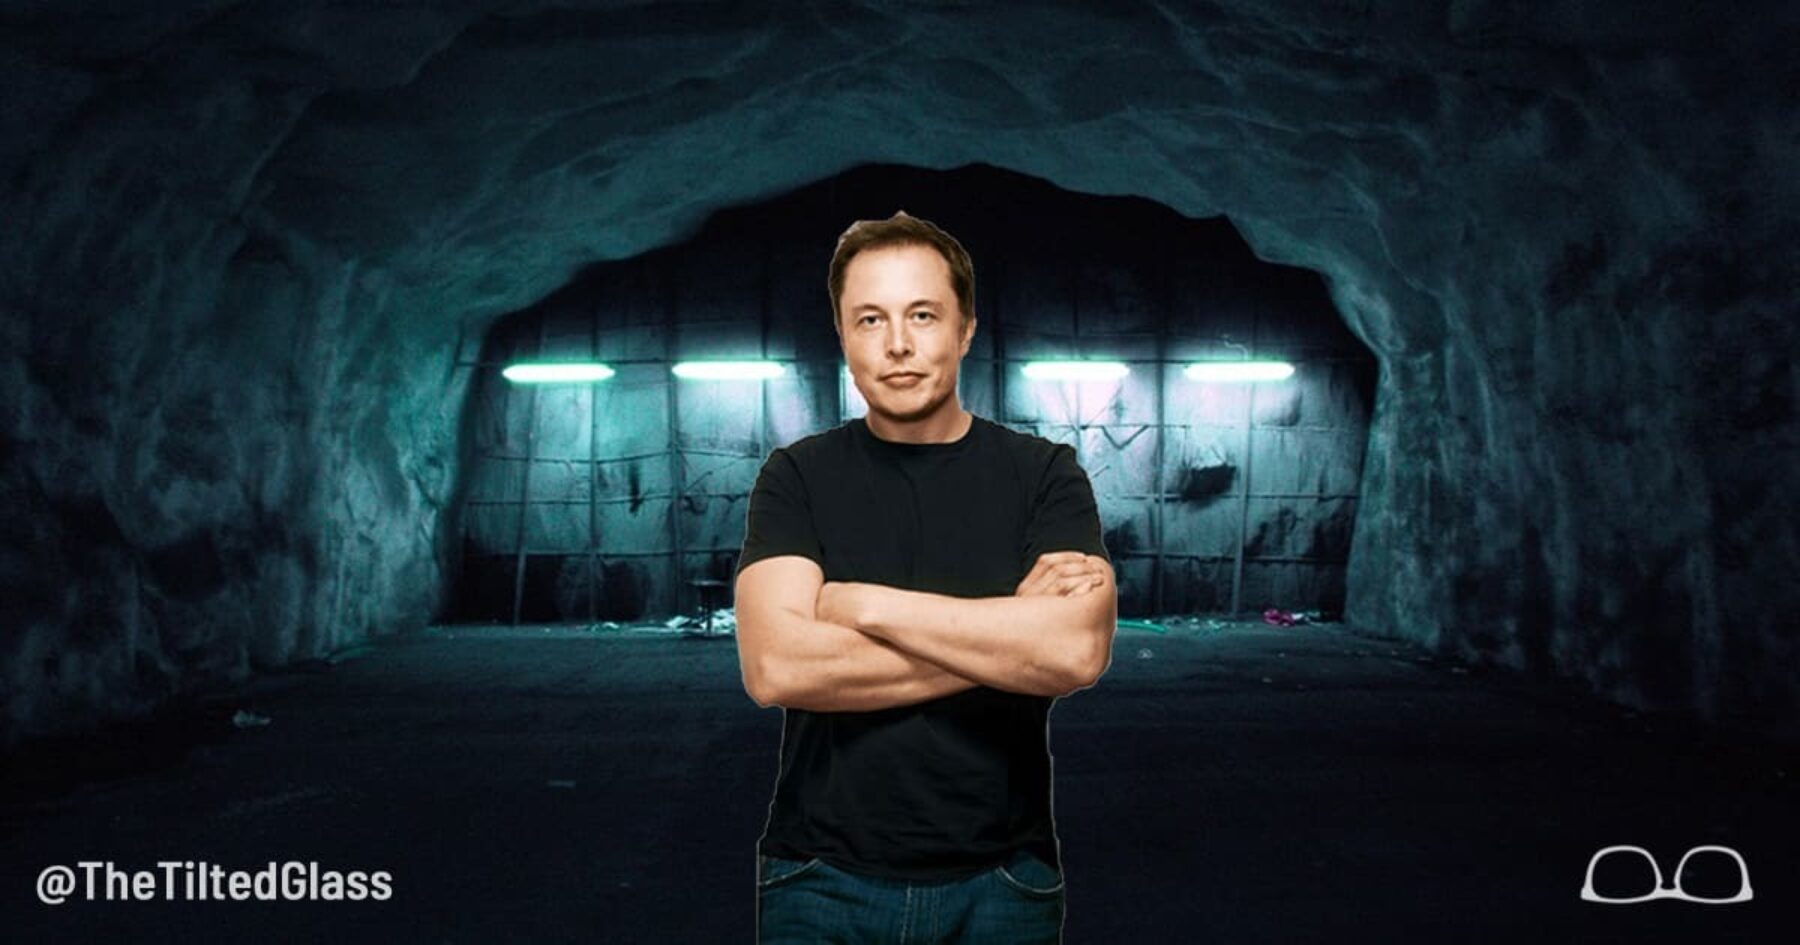 Elon Musk Invests in Bunker Technology, Disappears